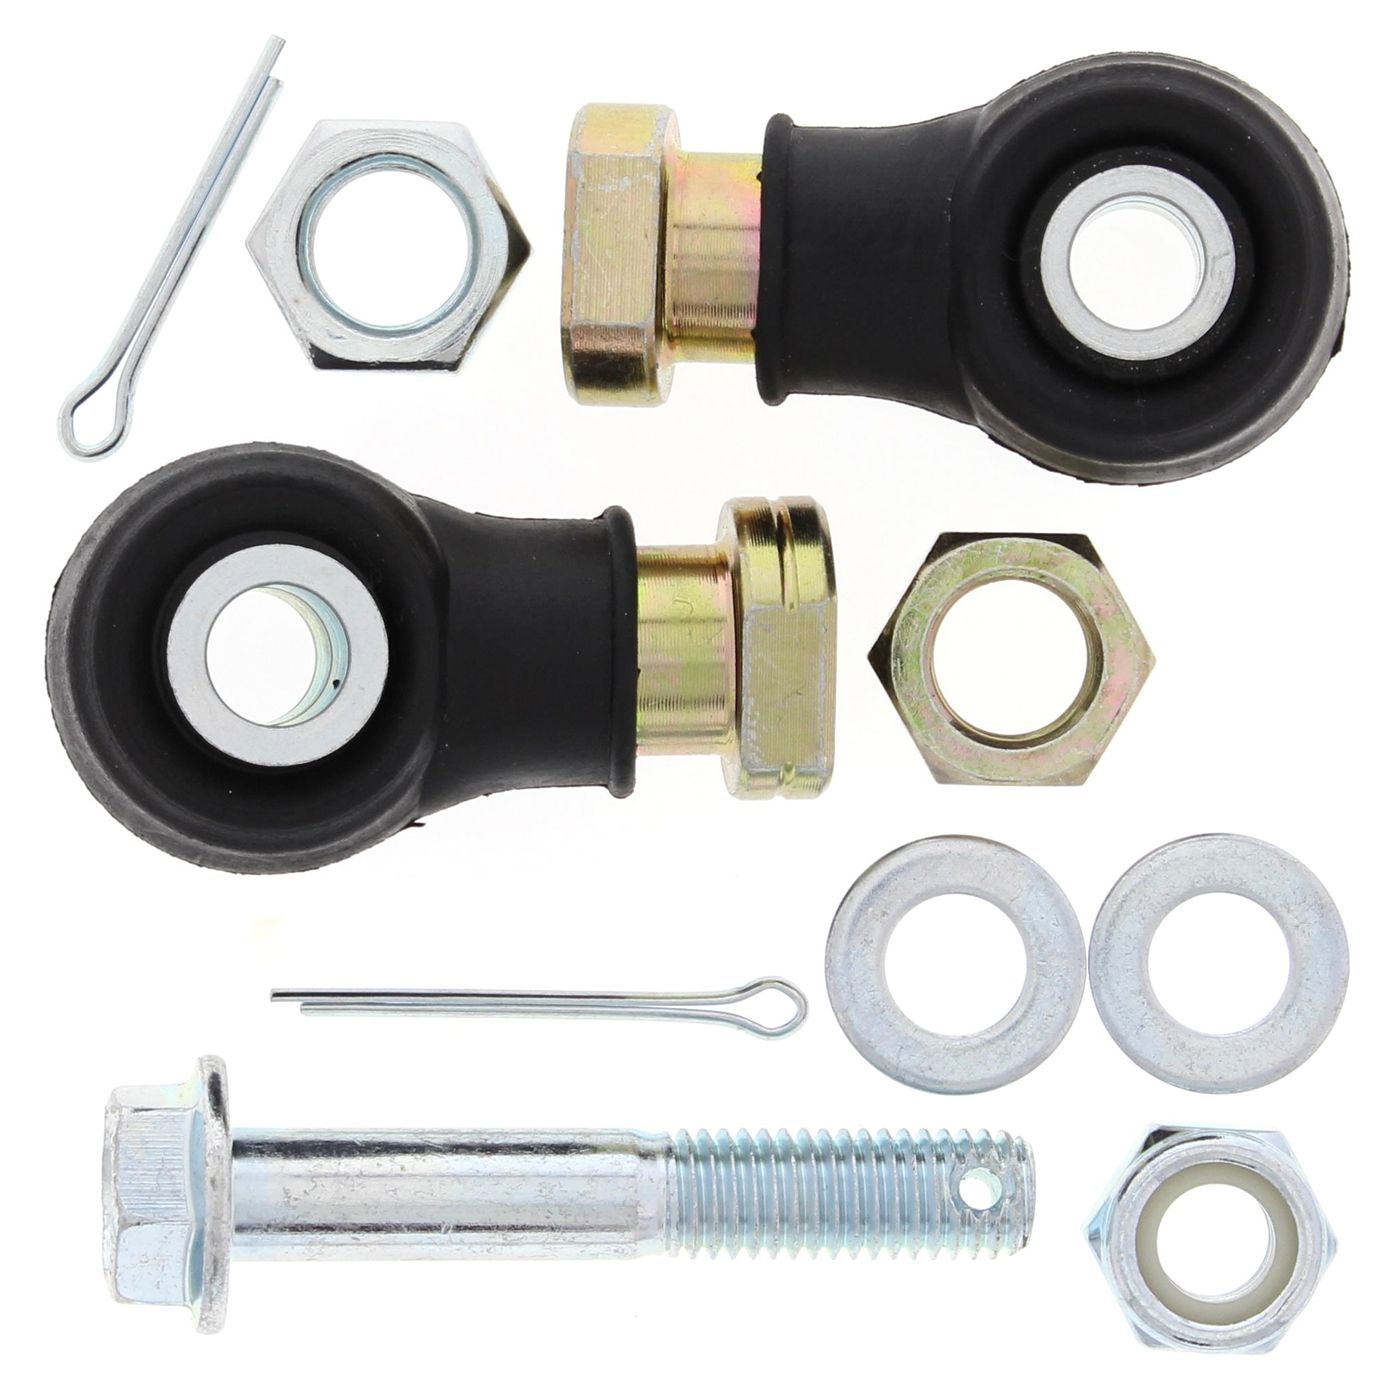 Wrp Tie Rod Ends - WRP511021 image